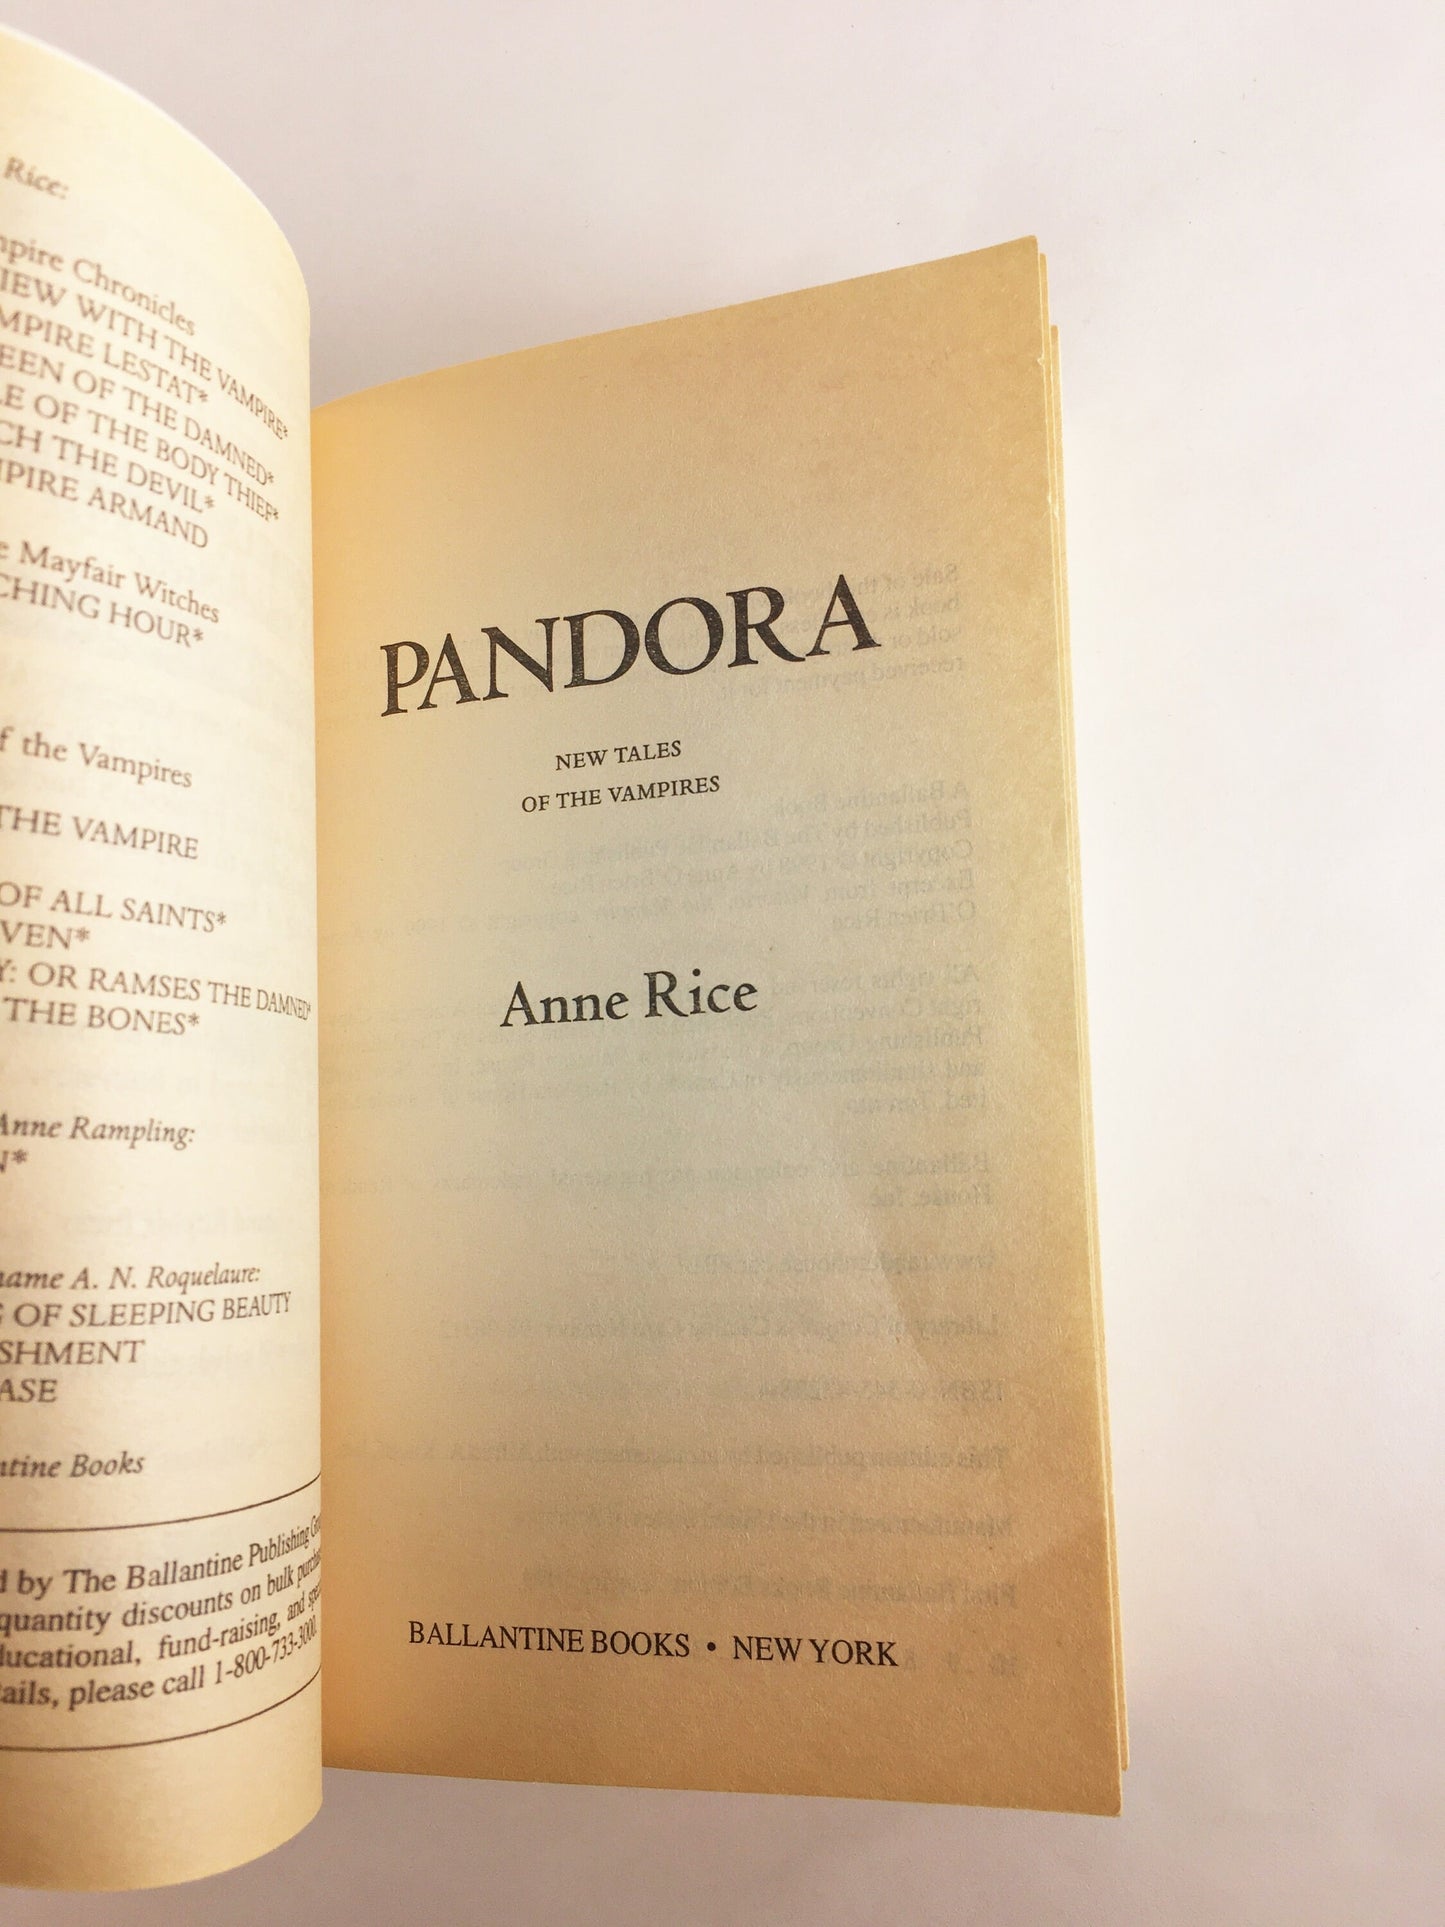 Pandora New Tales of the Vampires by Anne Rice circa 1998 Vintage paperback by the author of Interview with a Vampire